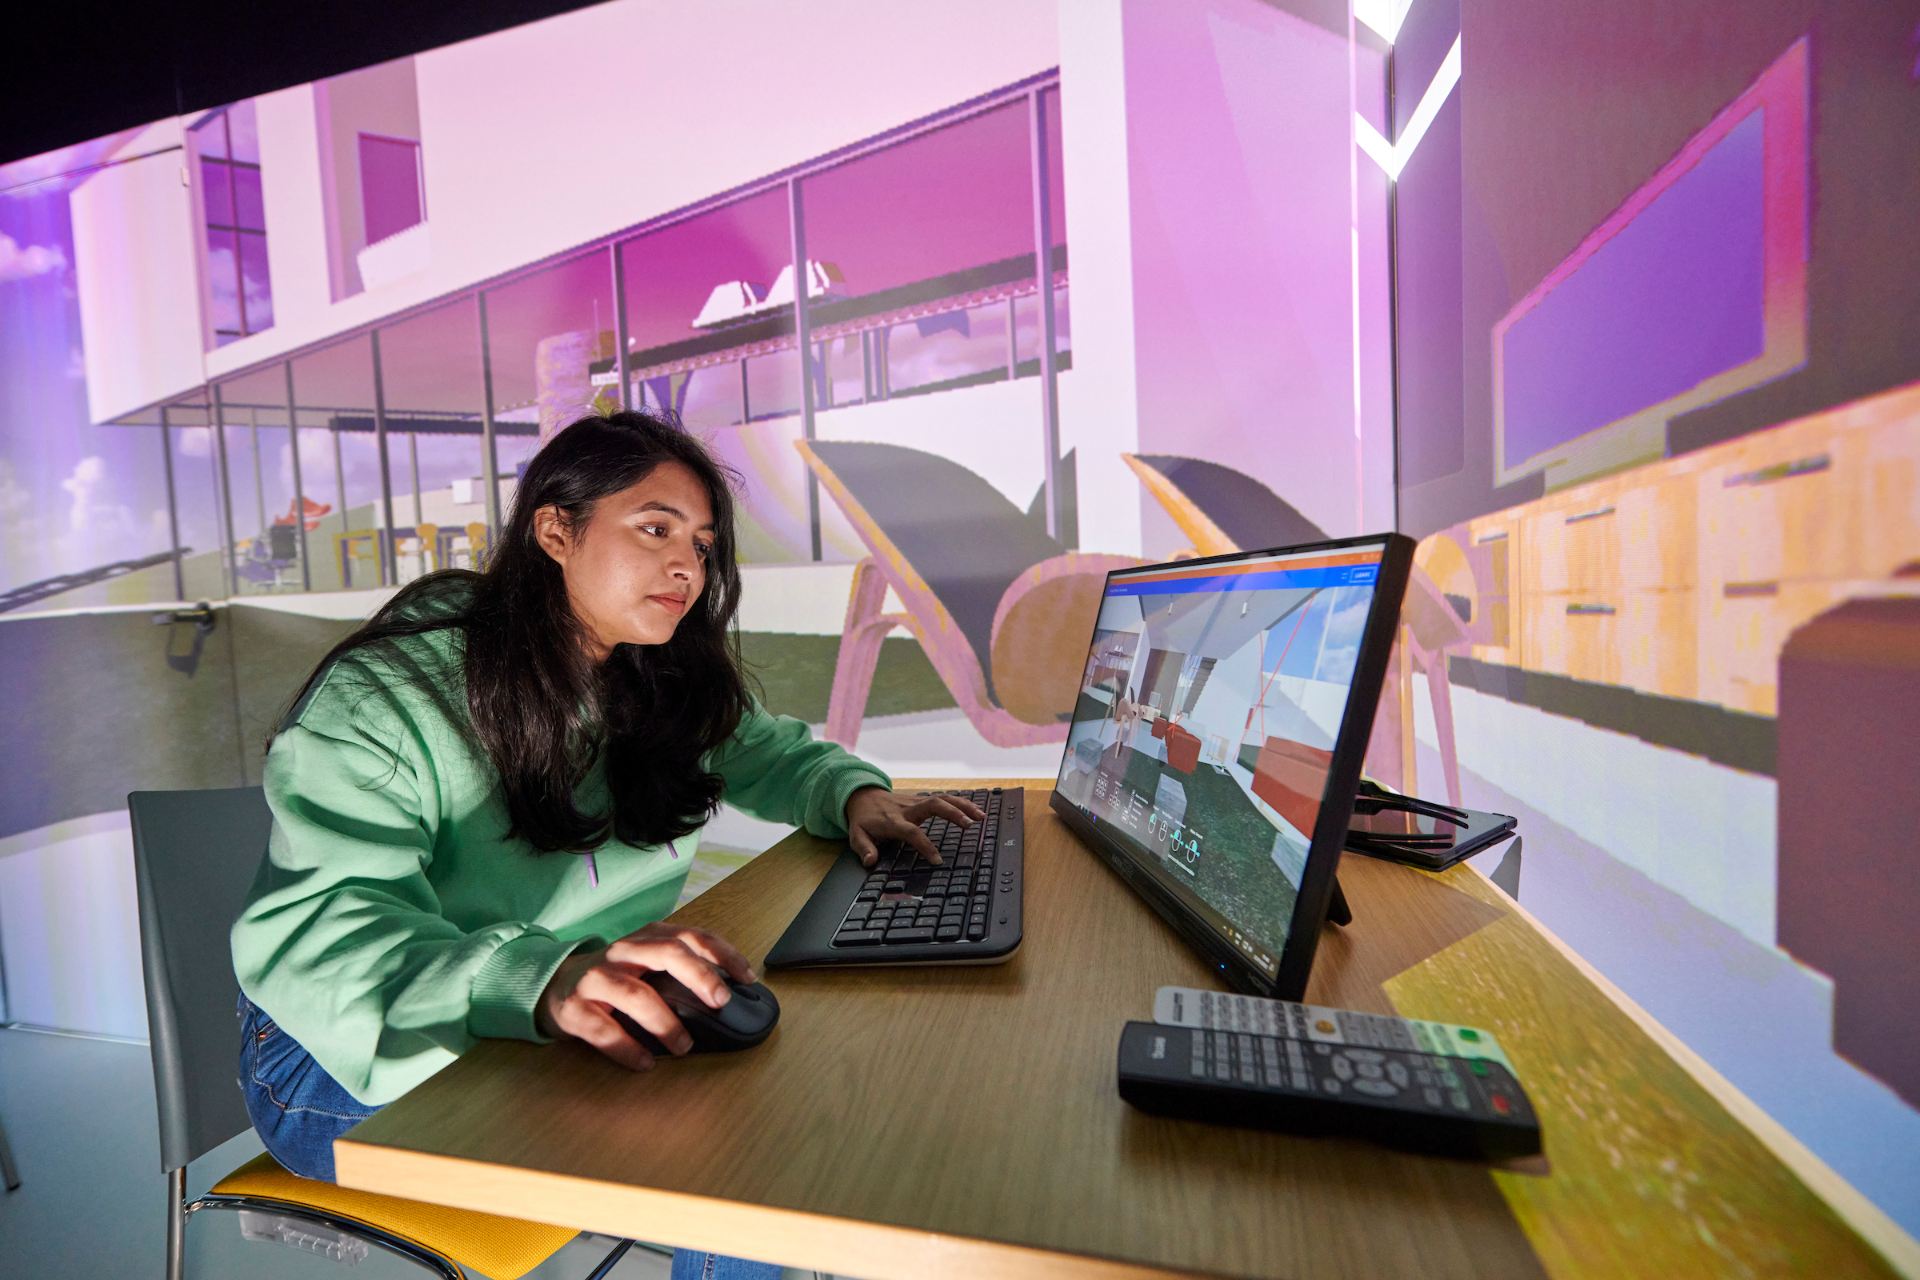 Female student using a computer with 3D imagery on the background behind her